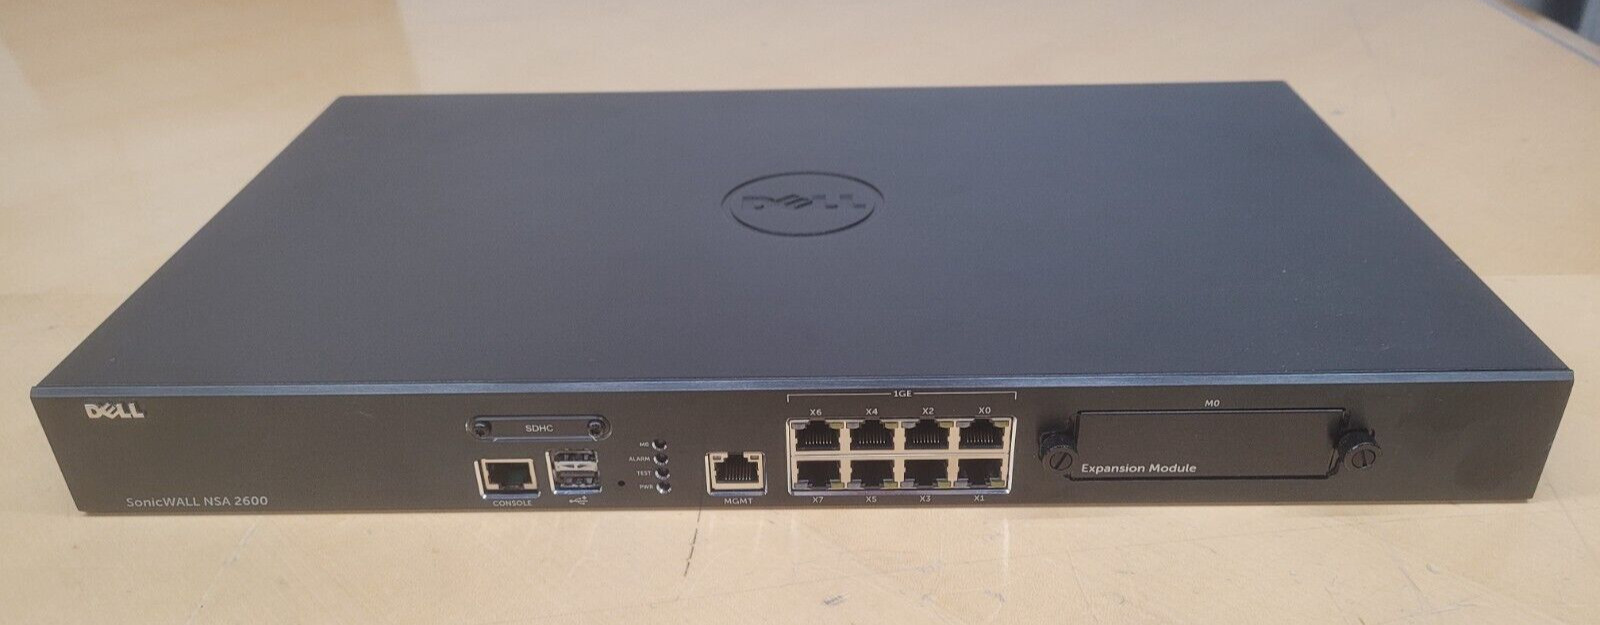 DELL SonicWALL NSA 2600 Network Security Firewall Appliance